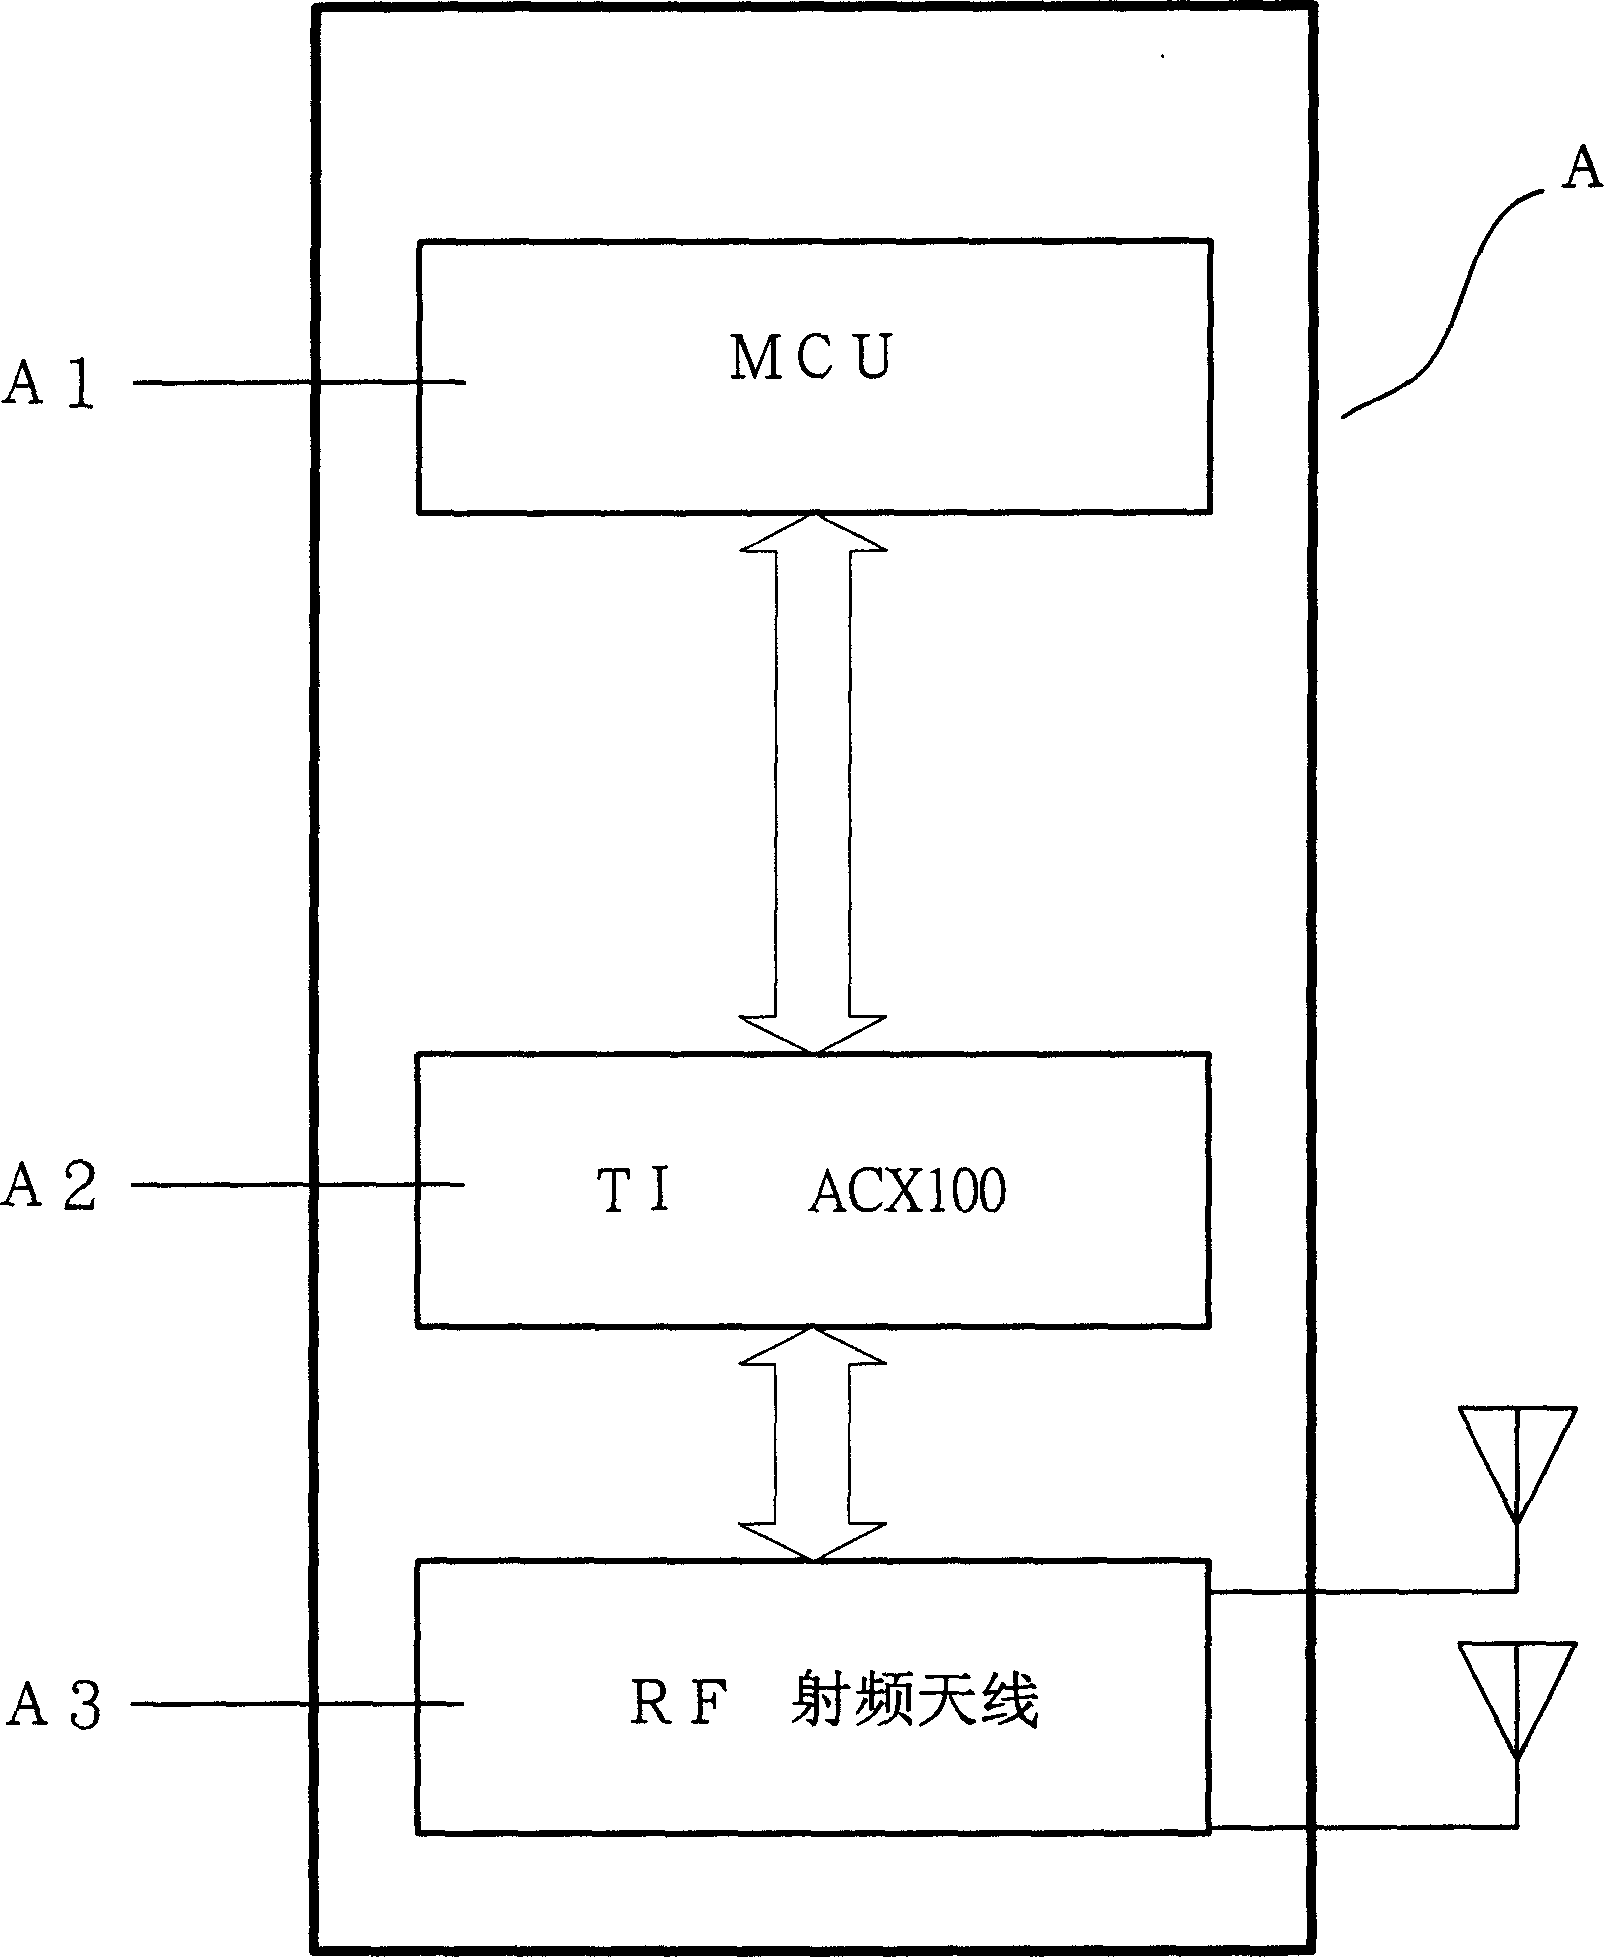 Compatible interface device of MCU and radio region network